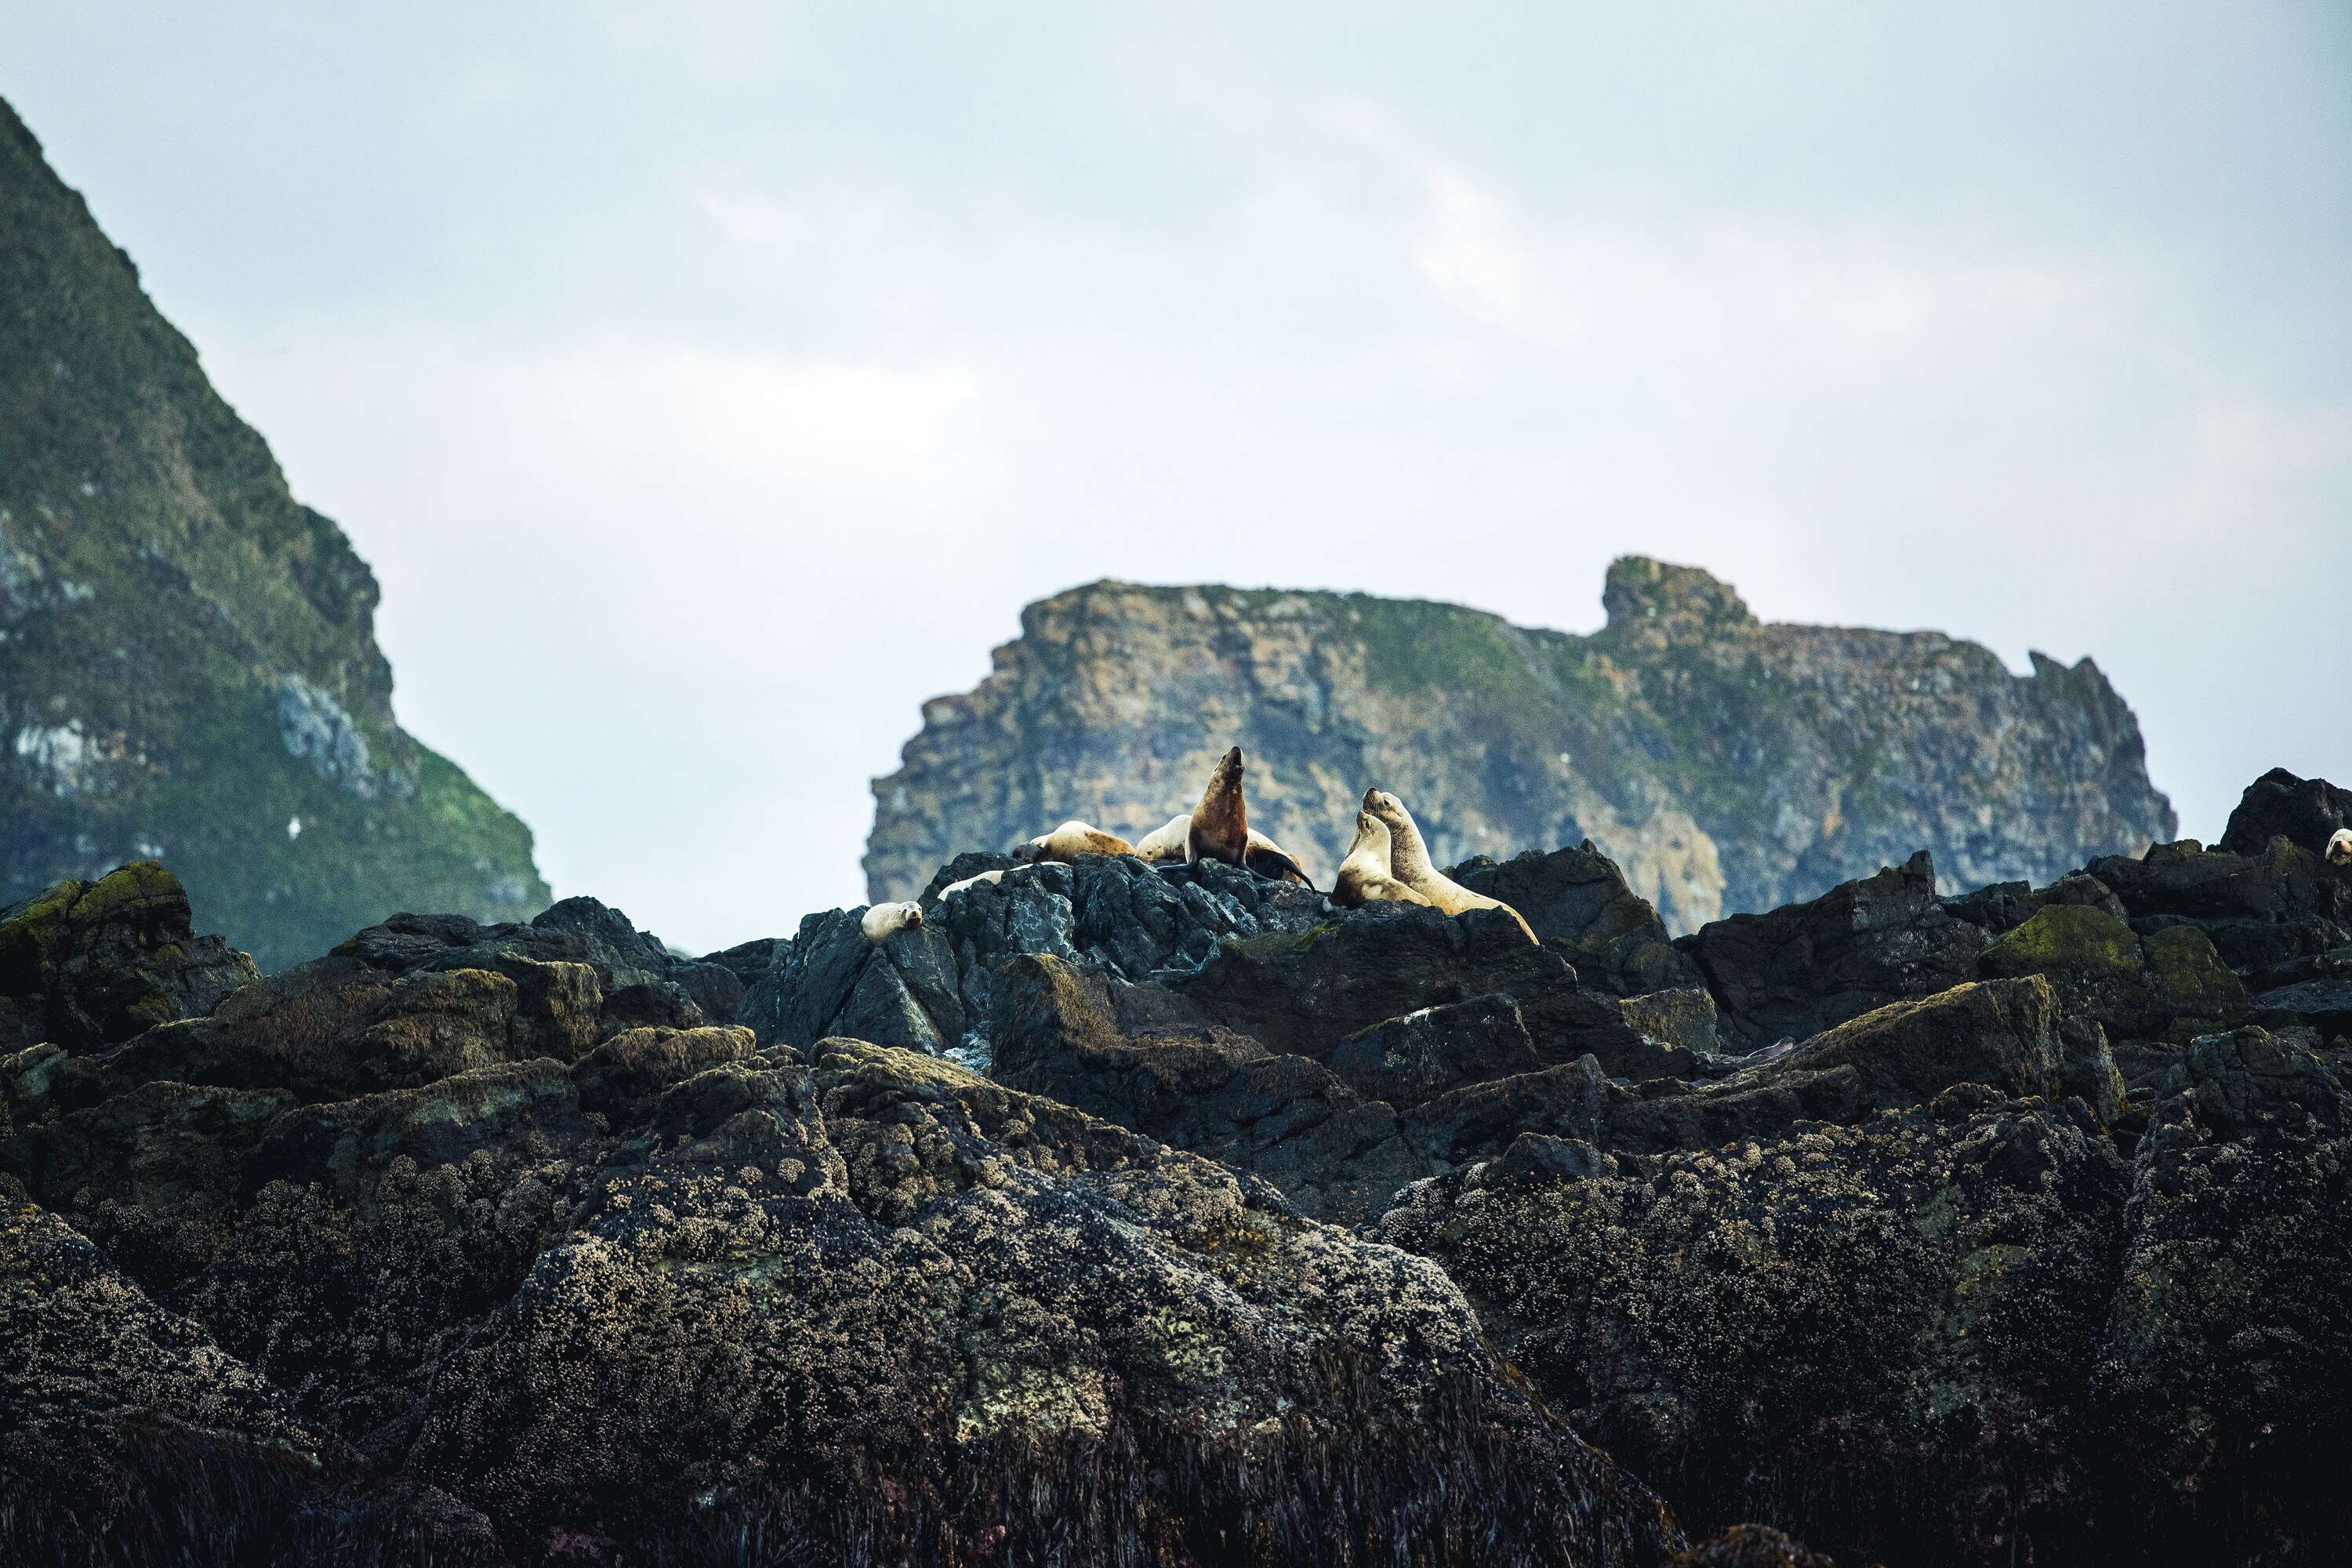 A small group of sea lions on rocky outcrop. (National Geographic for Disney+/Ryan Tidman)